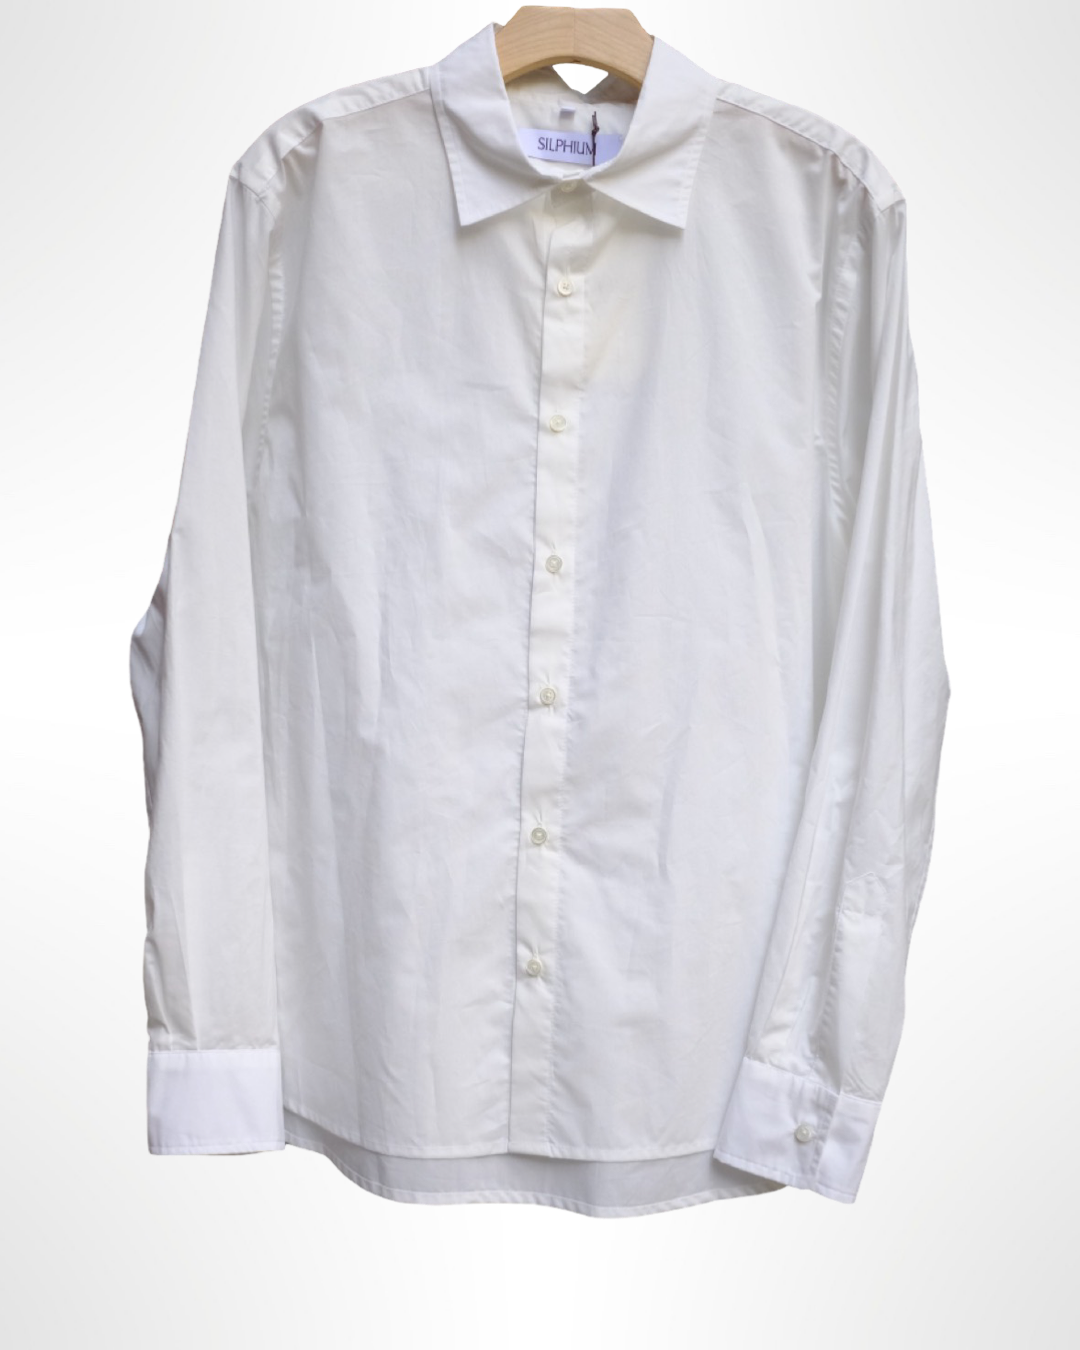 the beck shirt in white cotton